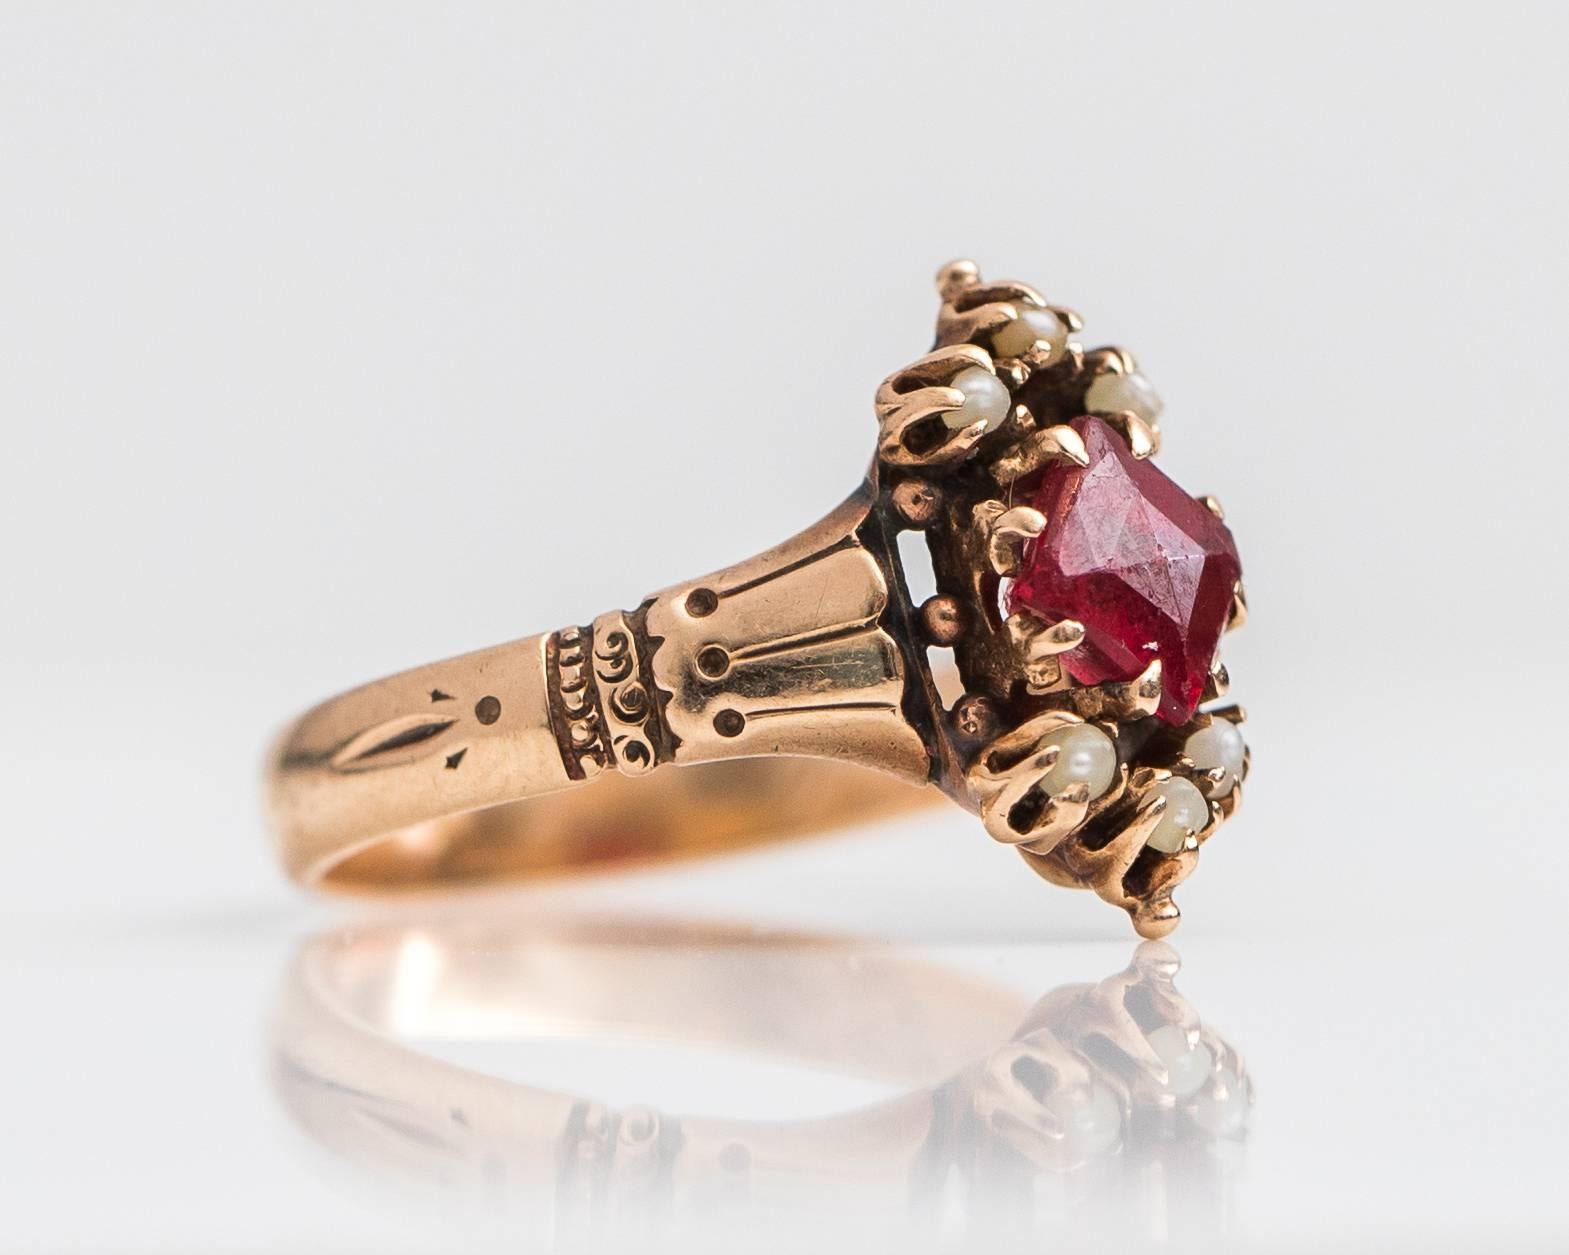 Antique 1890s Victorian Ruby and Pearl 9 Karat Yellow Gold Ring. 
Features a prong set Red Simulated Ruby with 6 Natural Seed Pearls in 9 Karat Yellow Gold. The round Ruby center stone is securely set with 8 Claw Prongs. The Natural Seed Pearls are